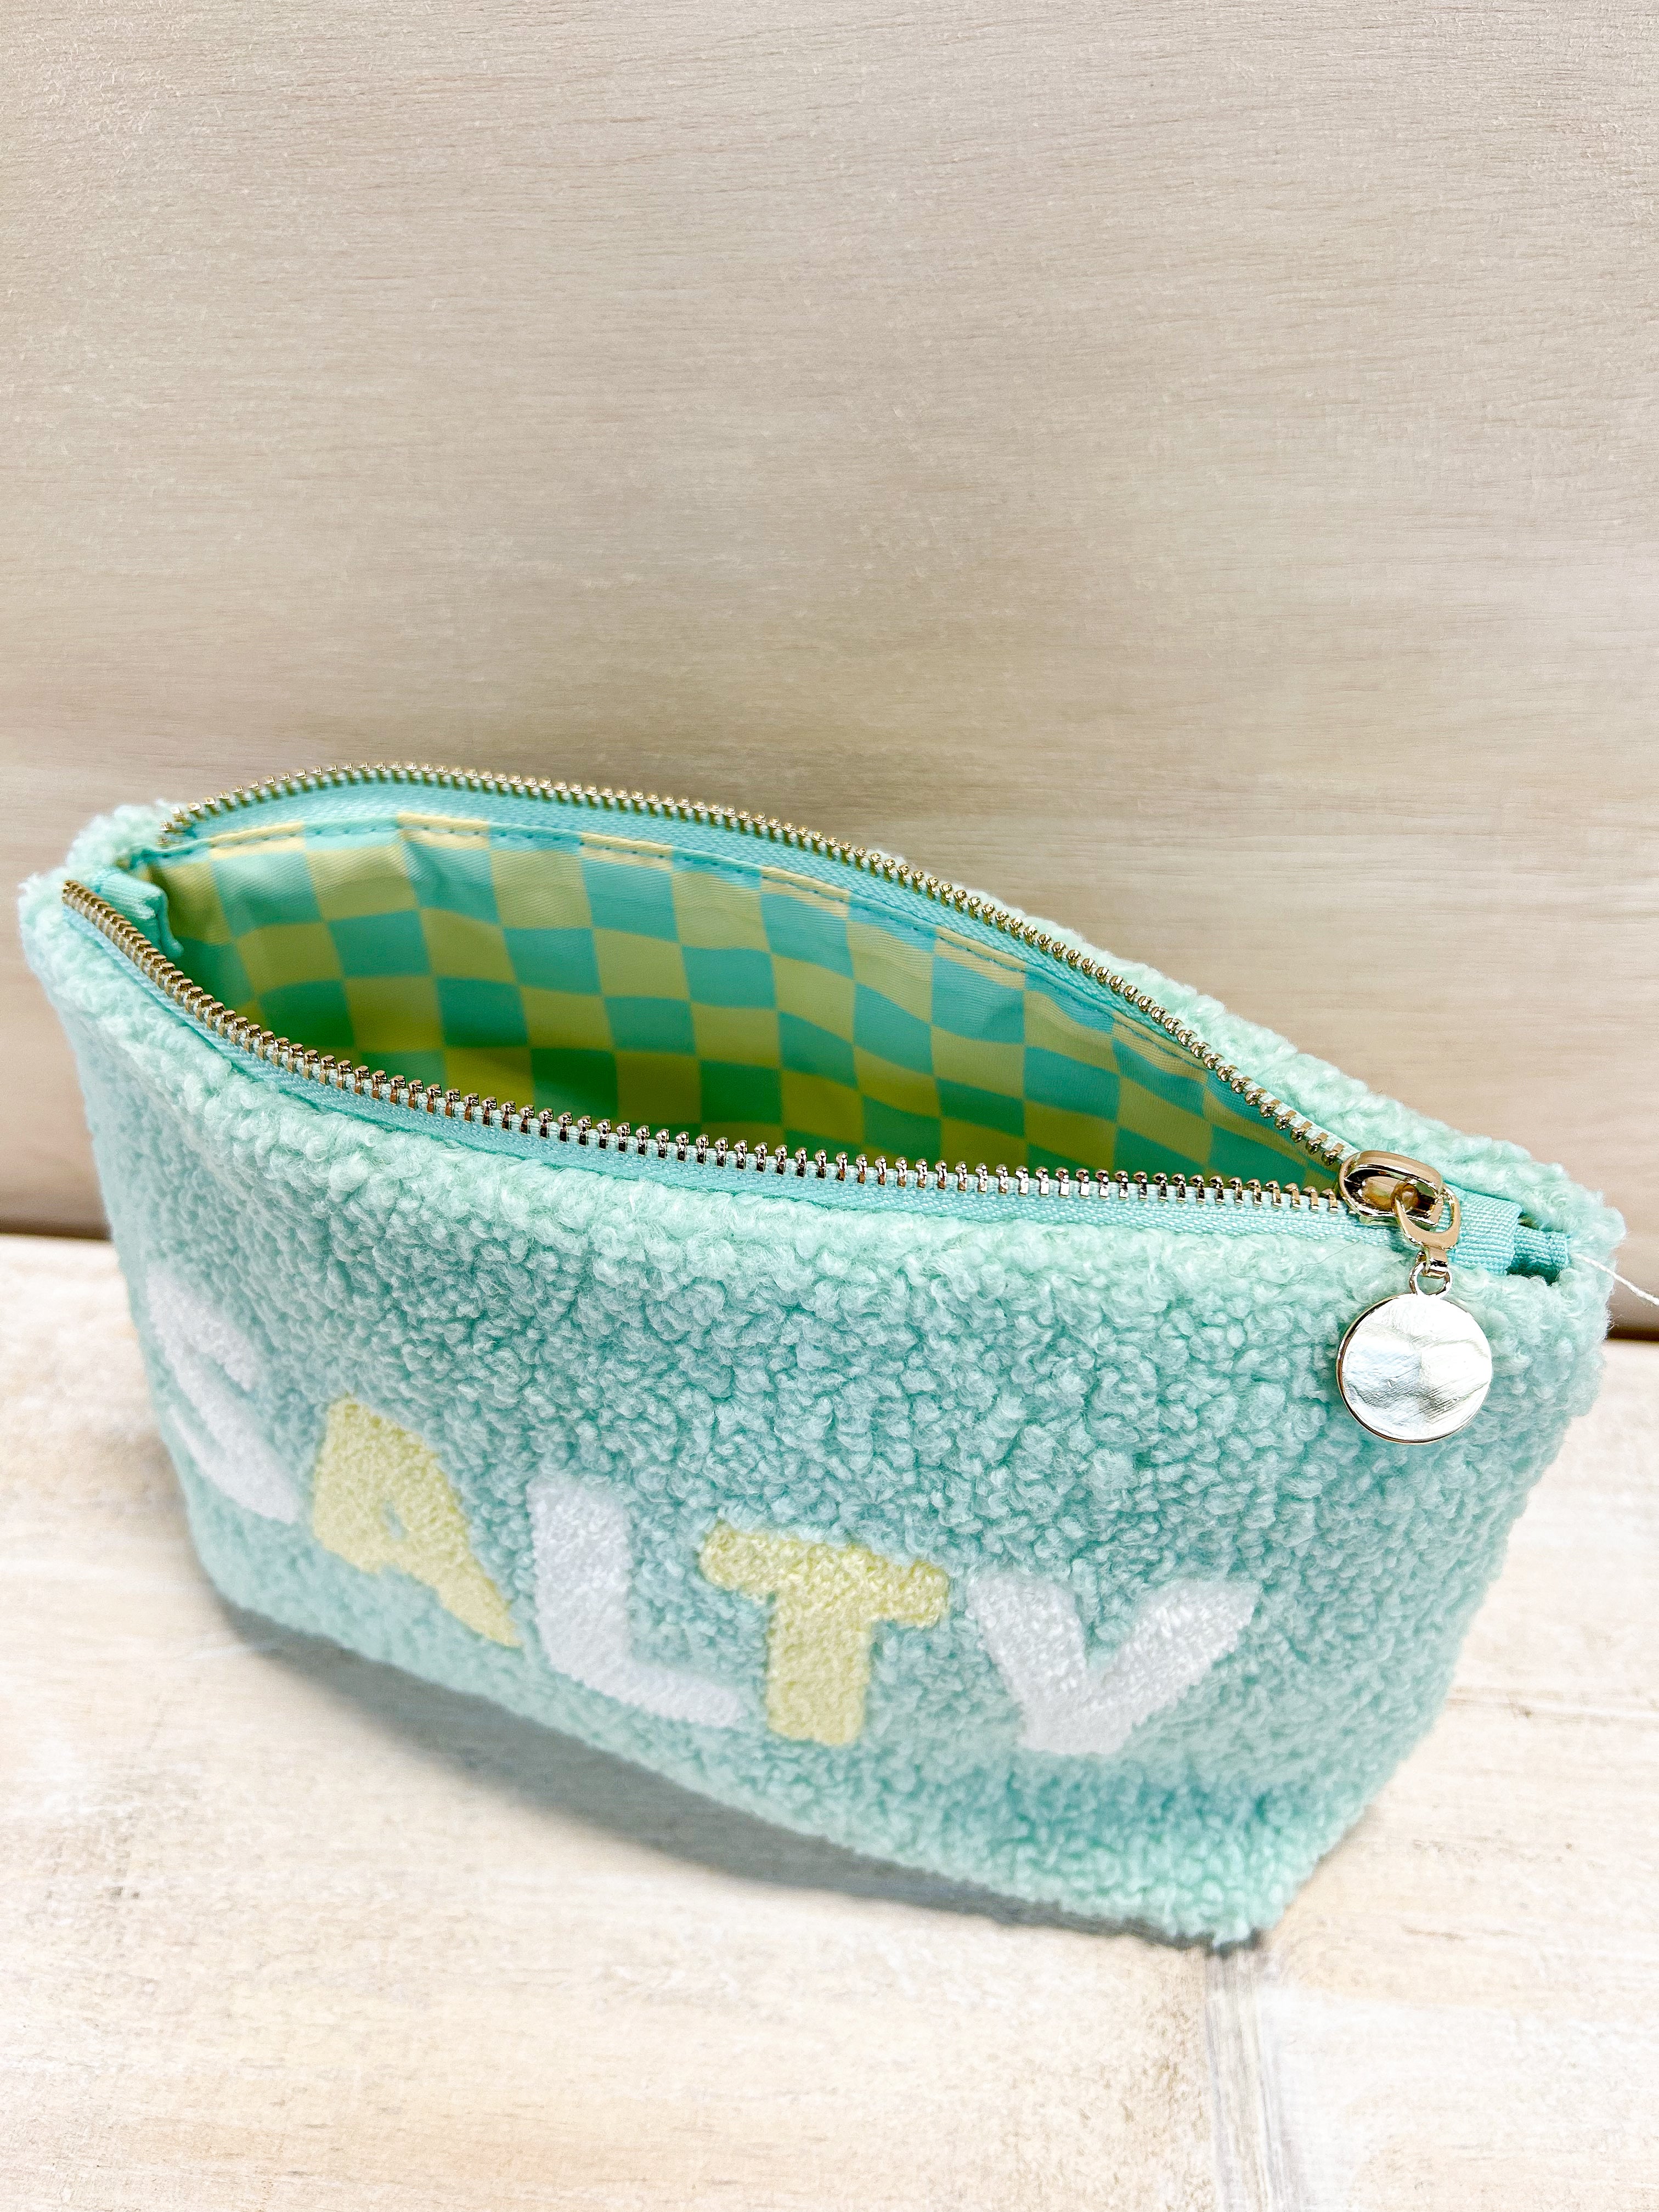 Salty teddy pouch, sherpa material, zipper closure,  checkered inside